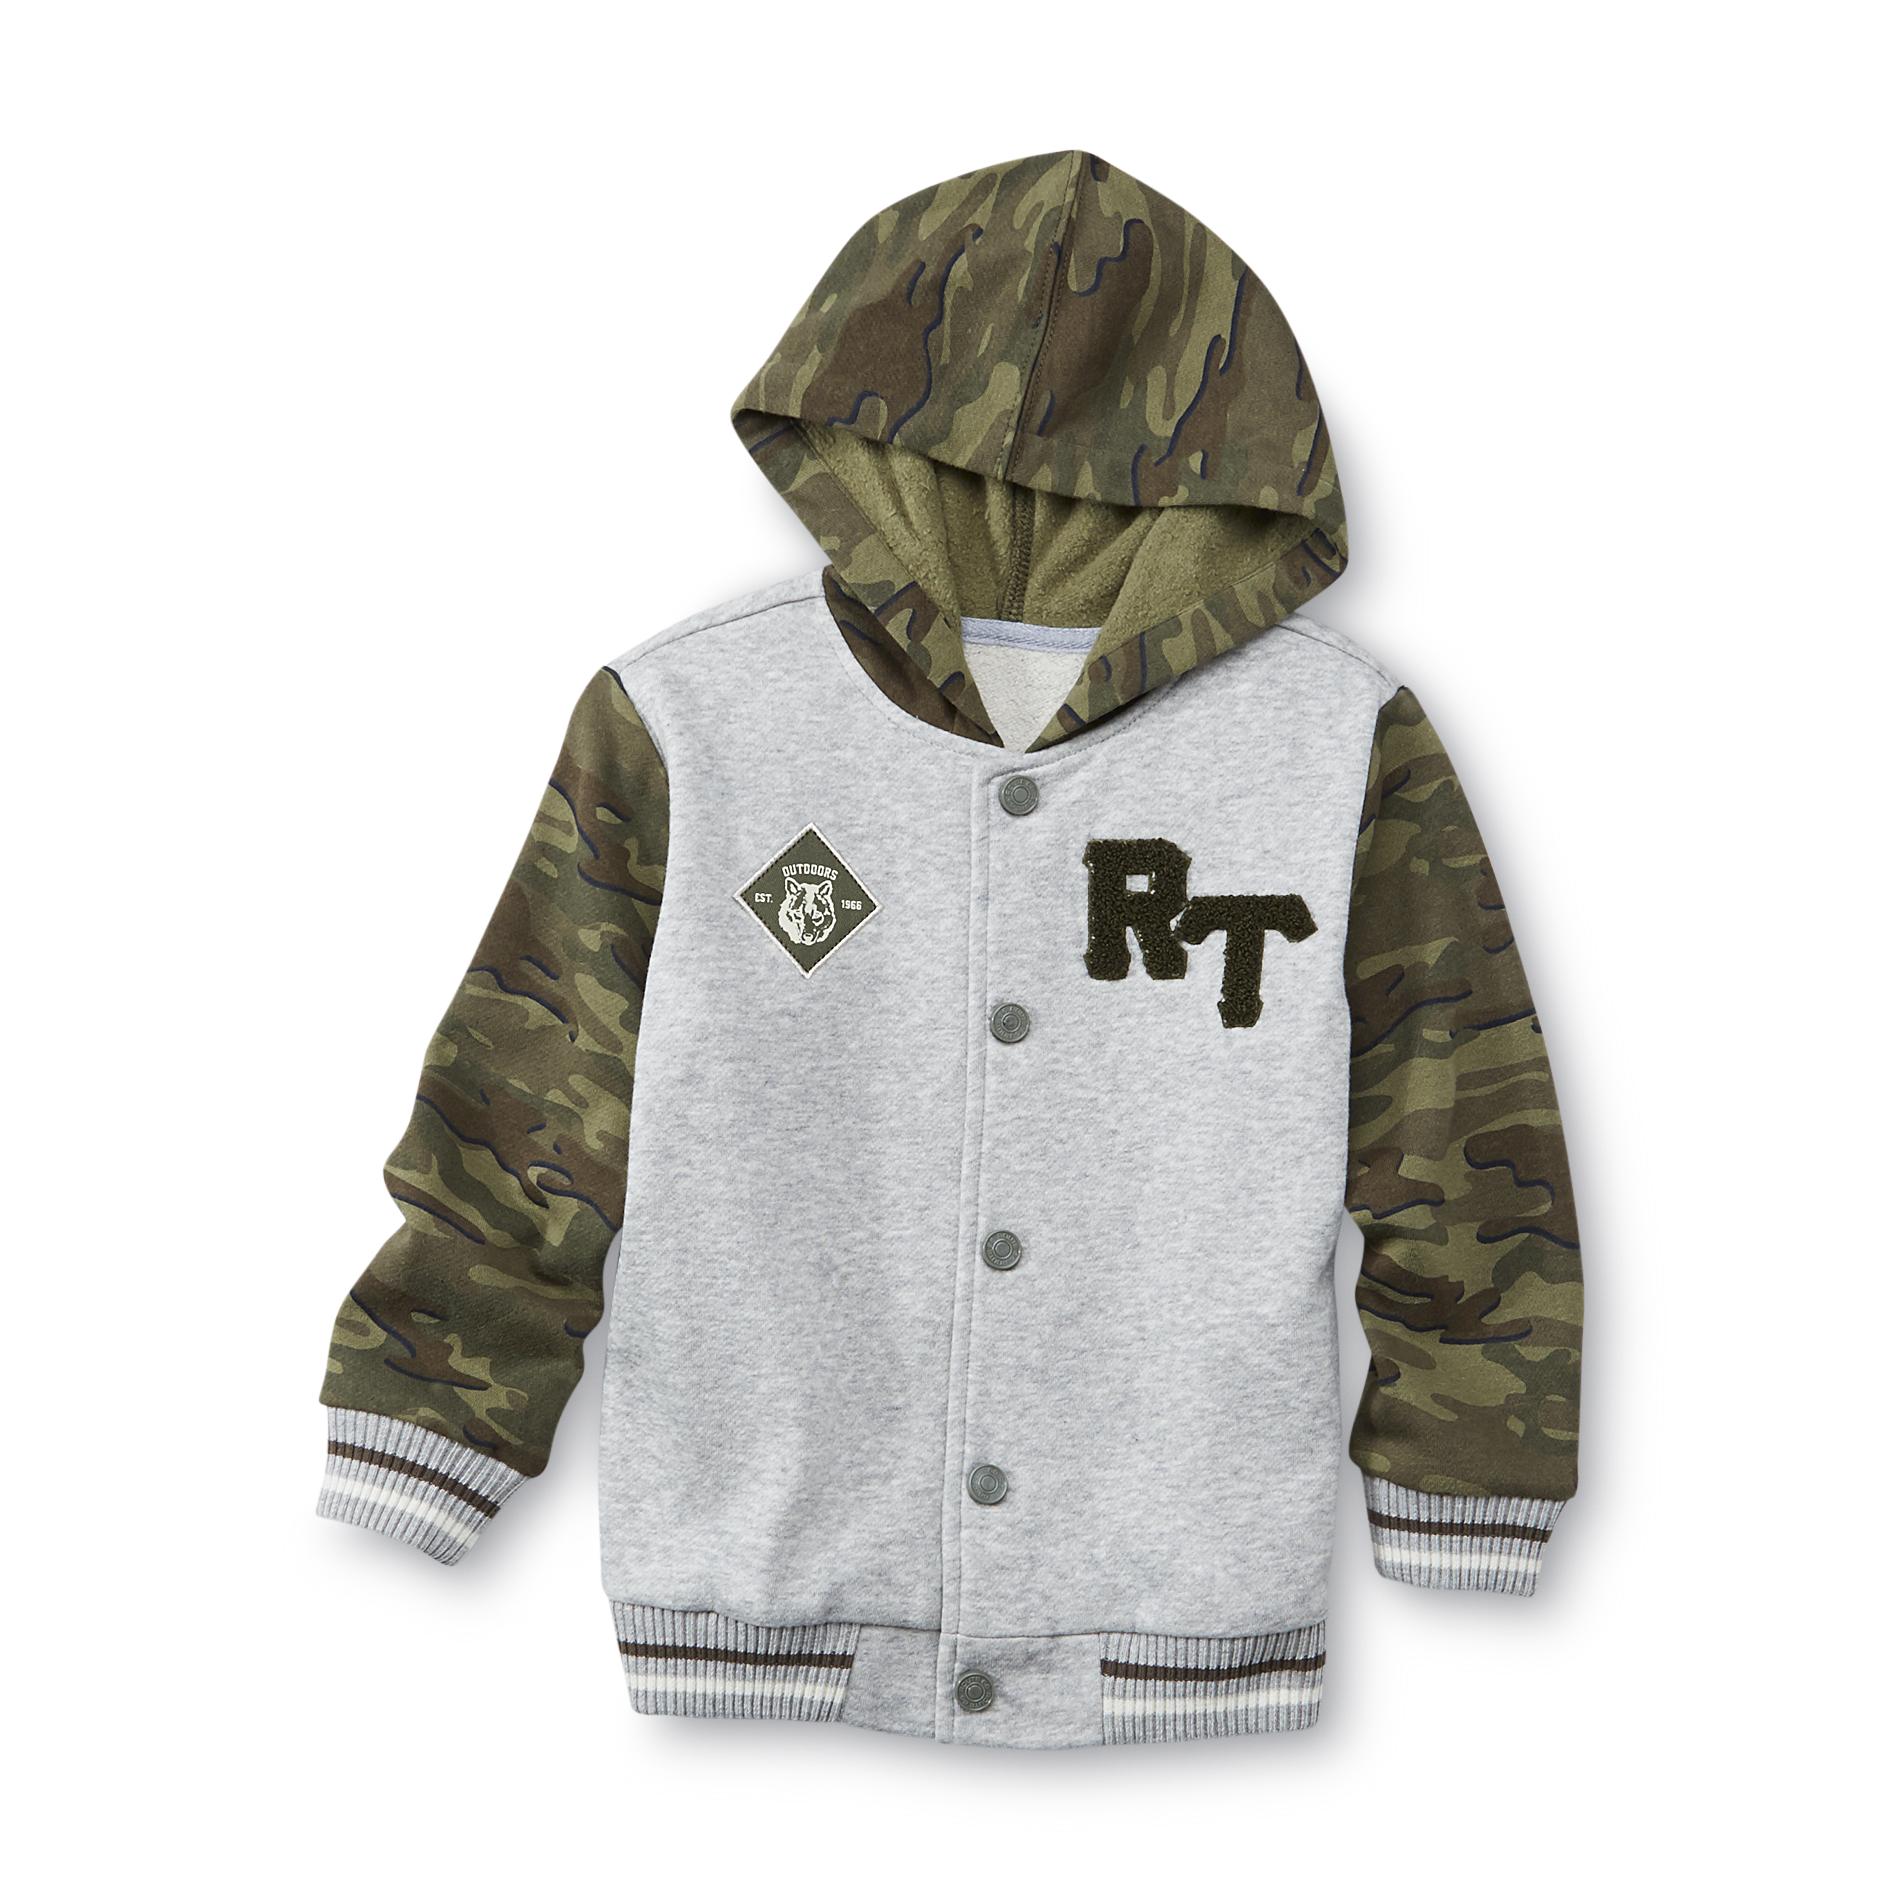 Route 66 Baby Toddler Boy's Academic Hoodie Jacket - Wolf